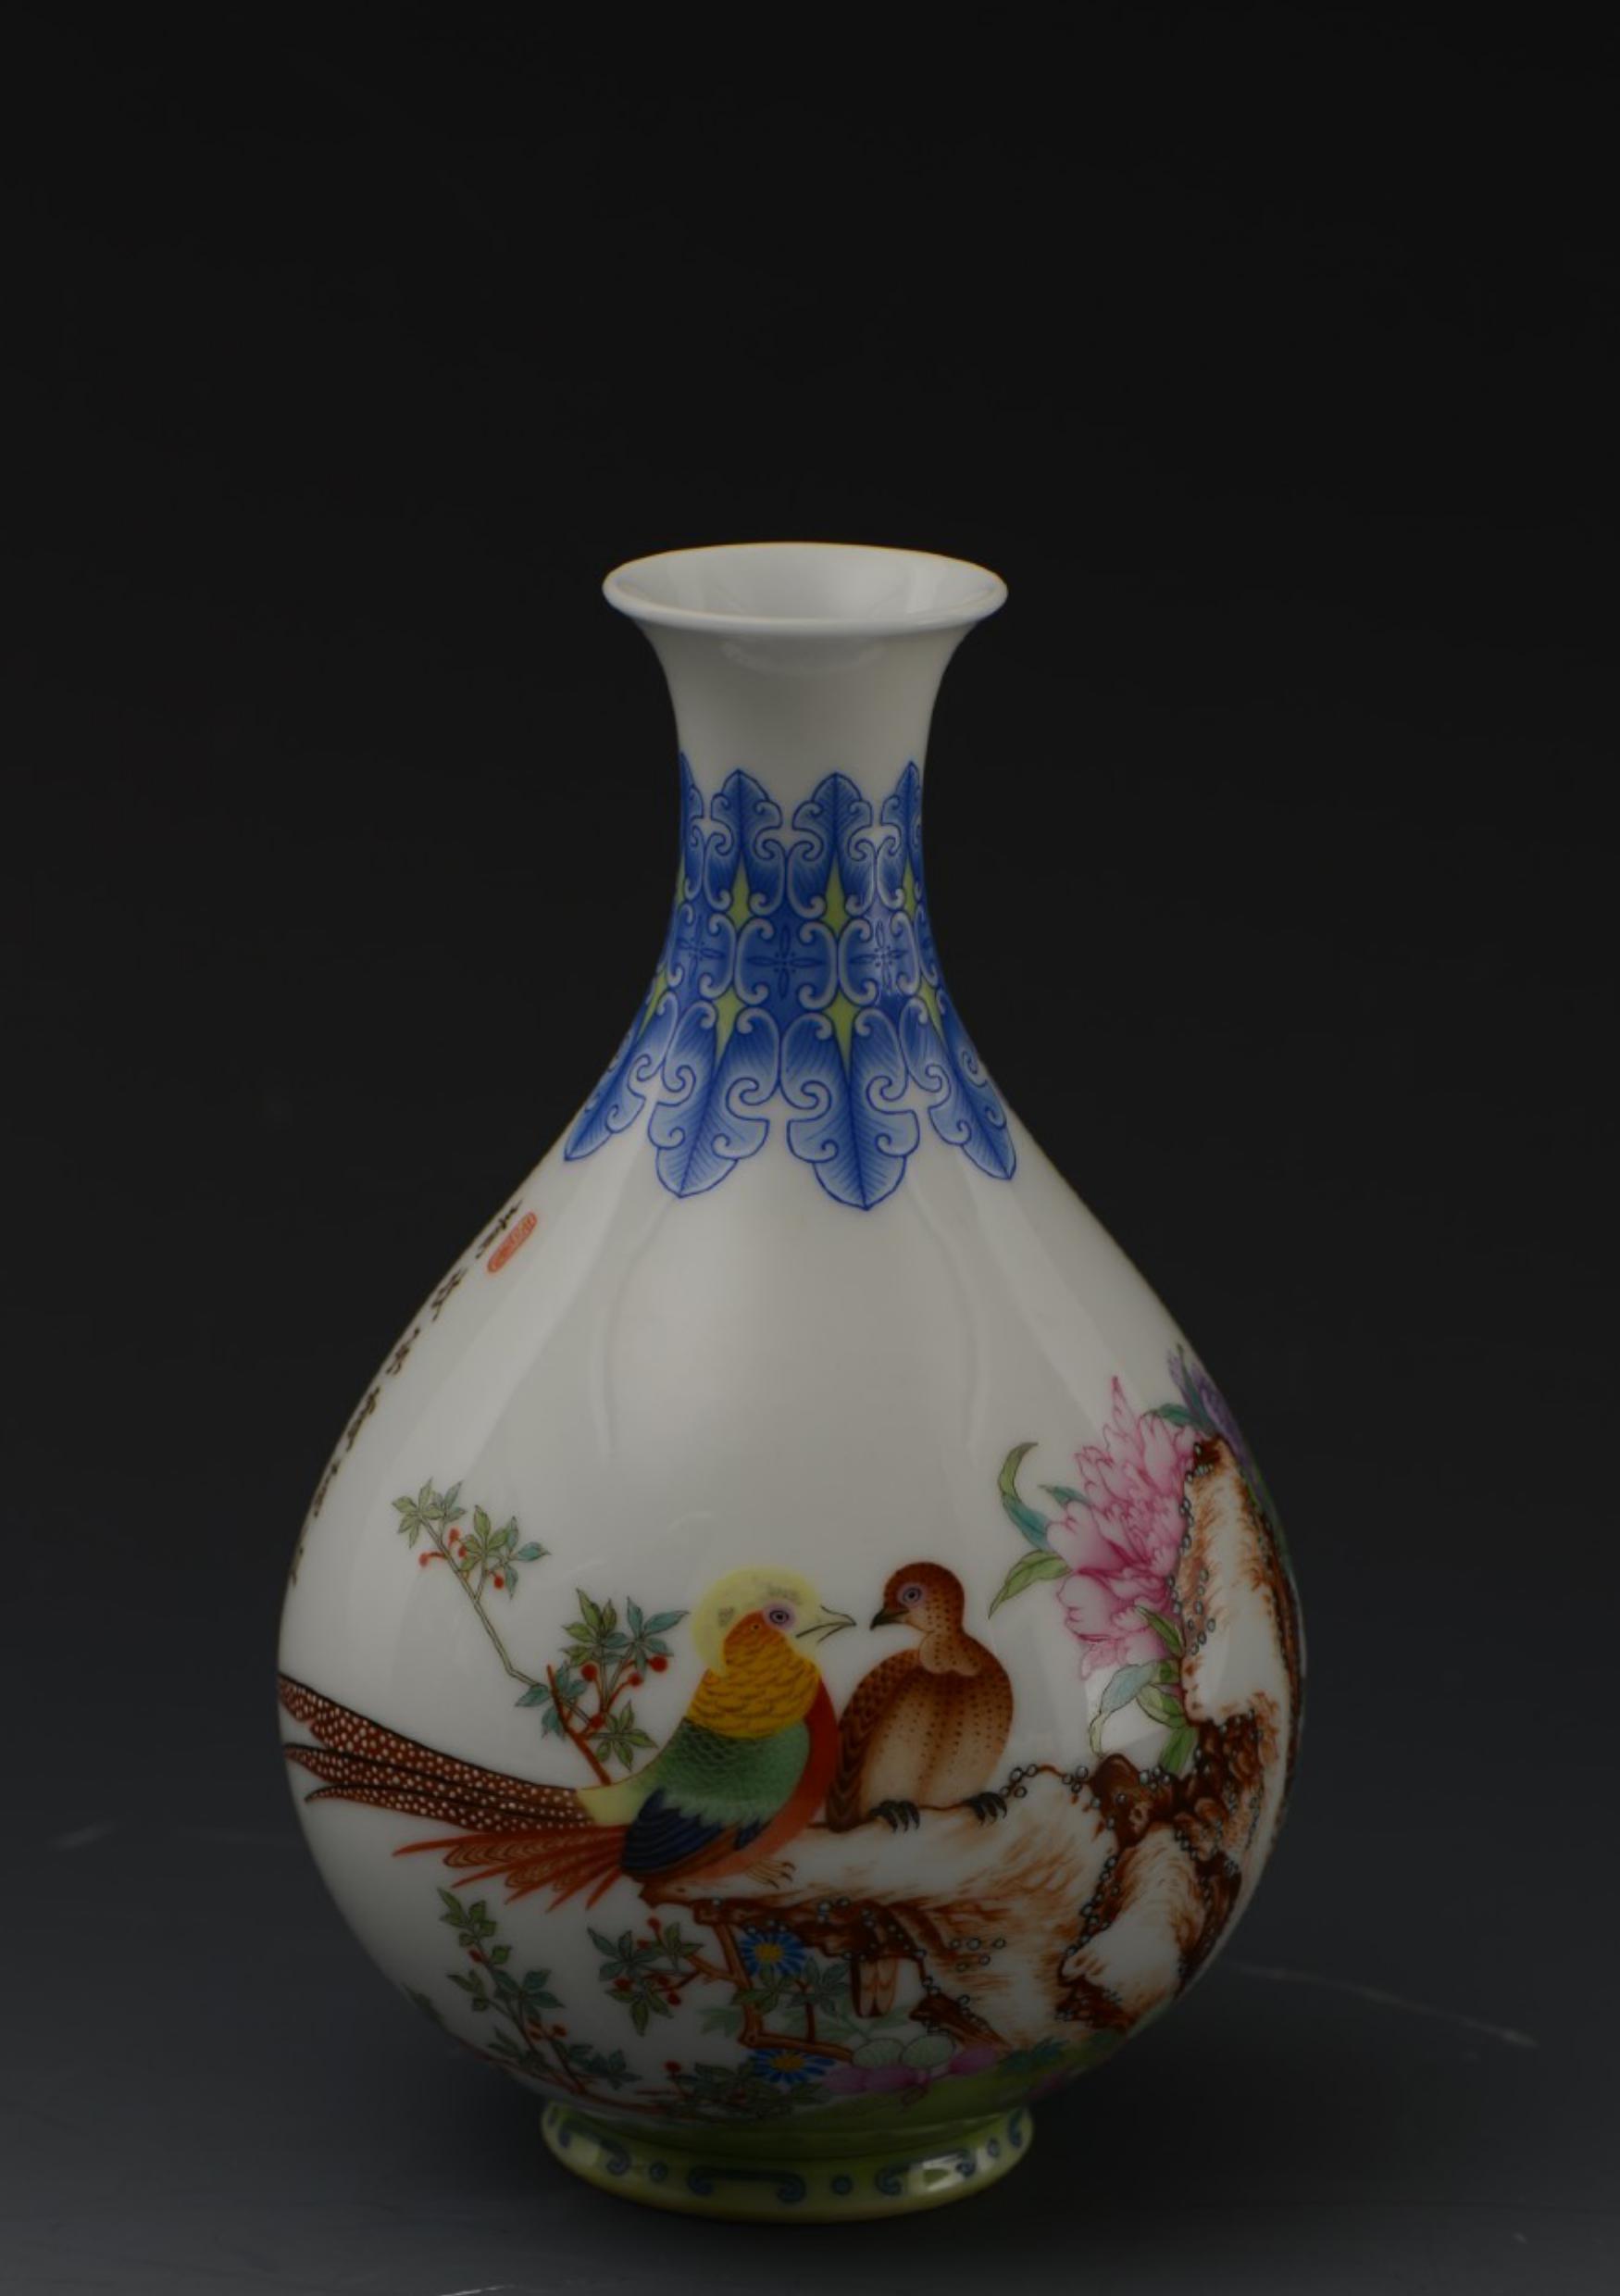 21st century reproduction of “Painted enamel pear-shaped vase with Qianlong mark”